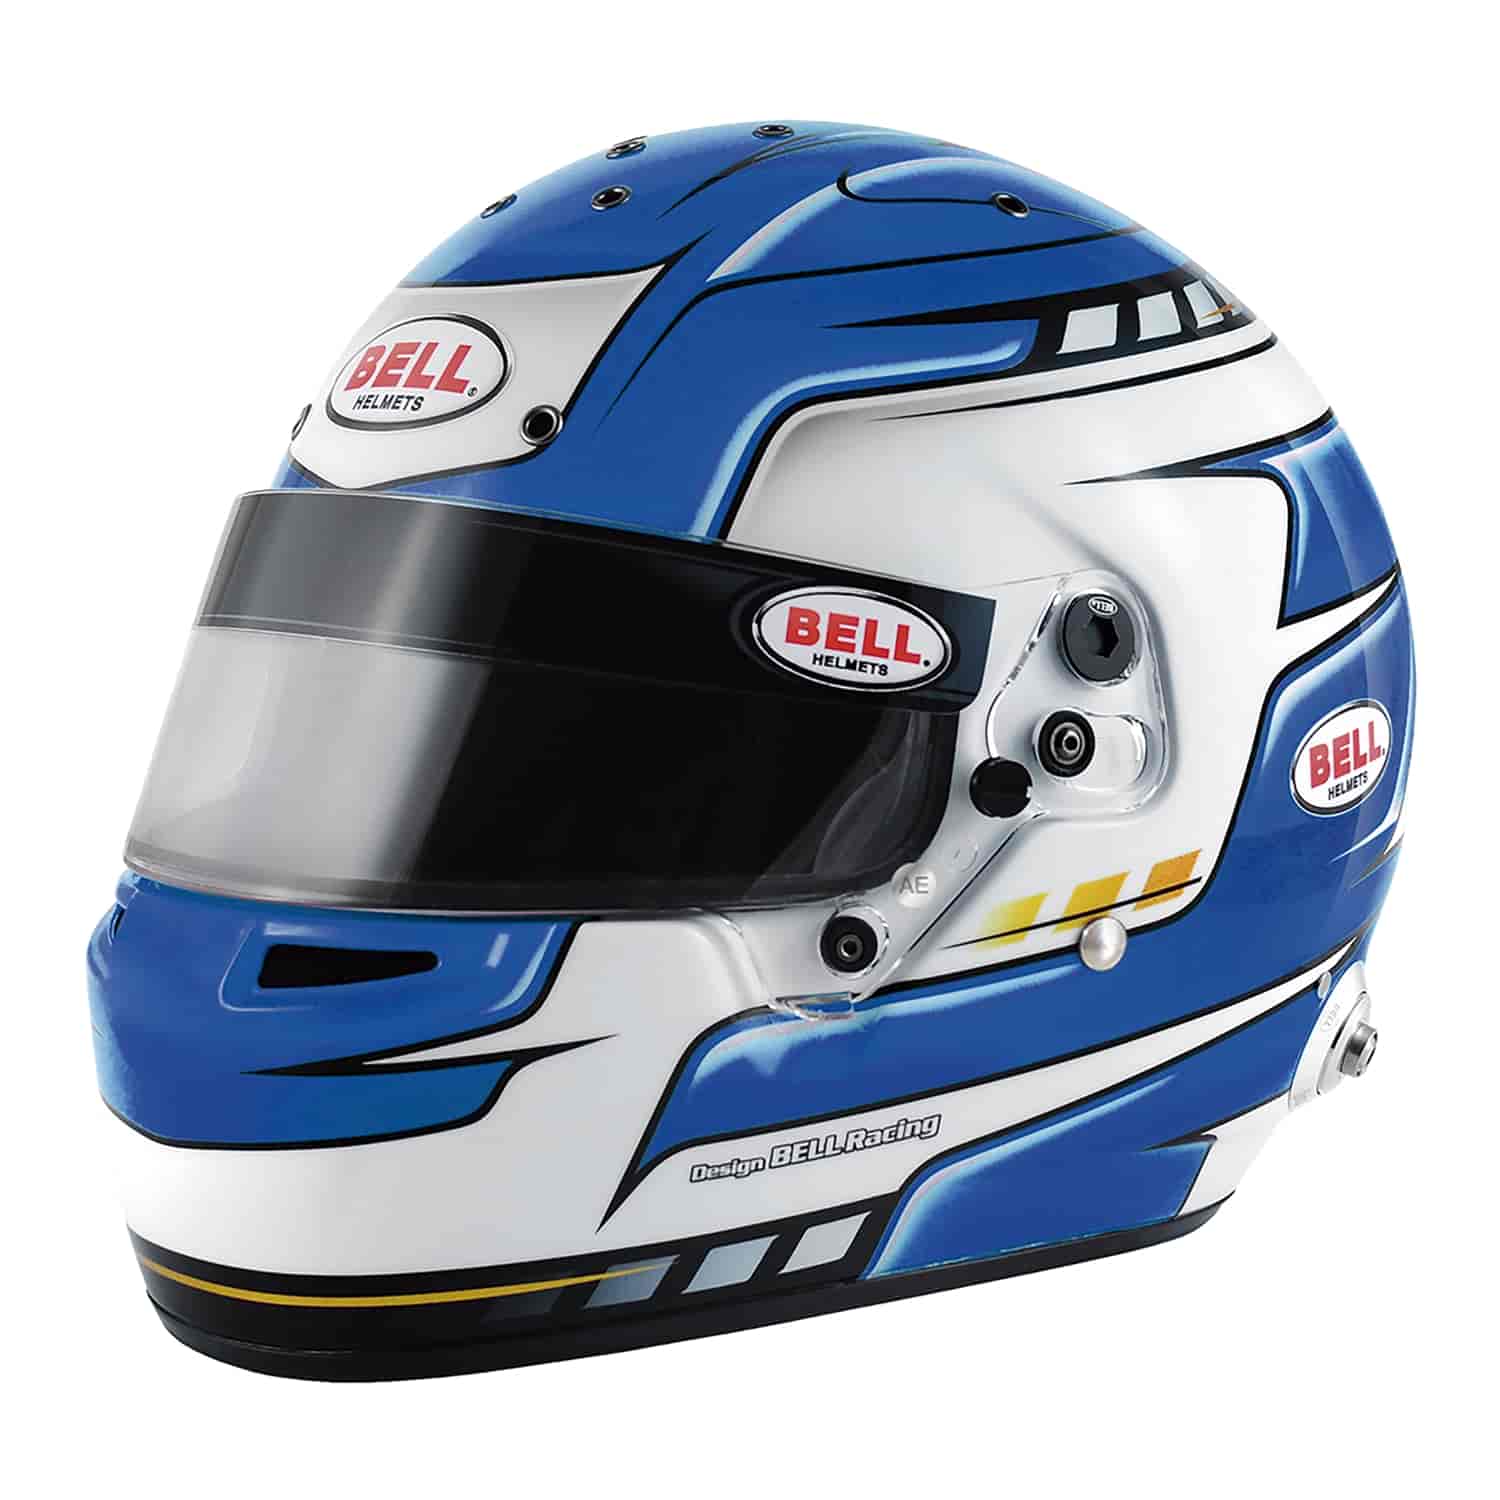 RS7 Helmet Falcon Blue - Snell SA2015/FIA Approved